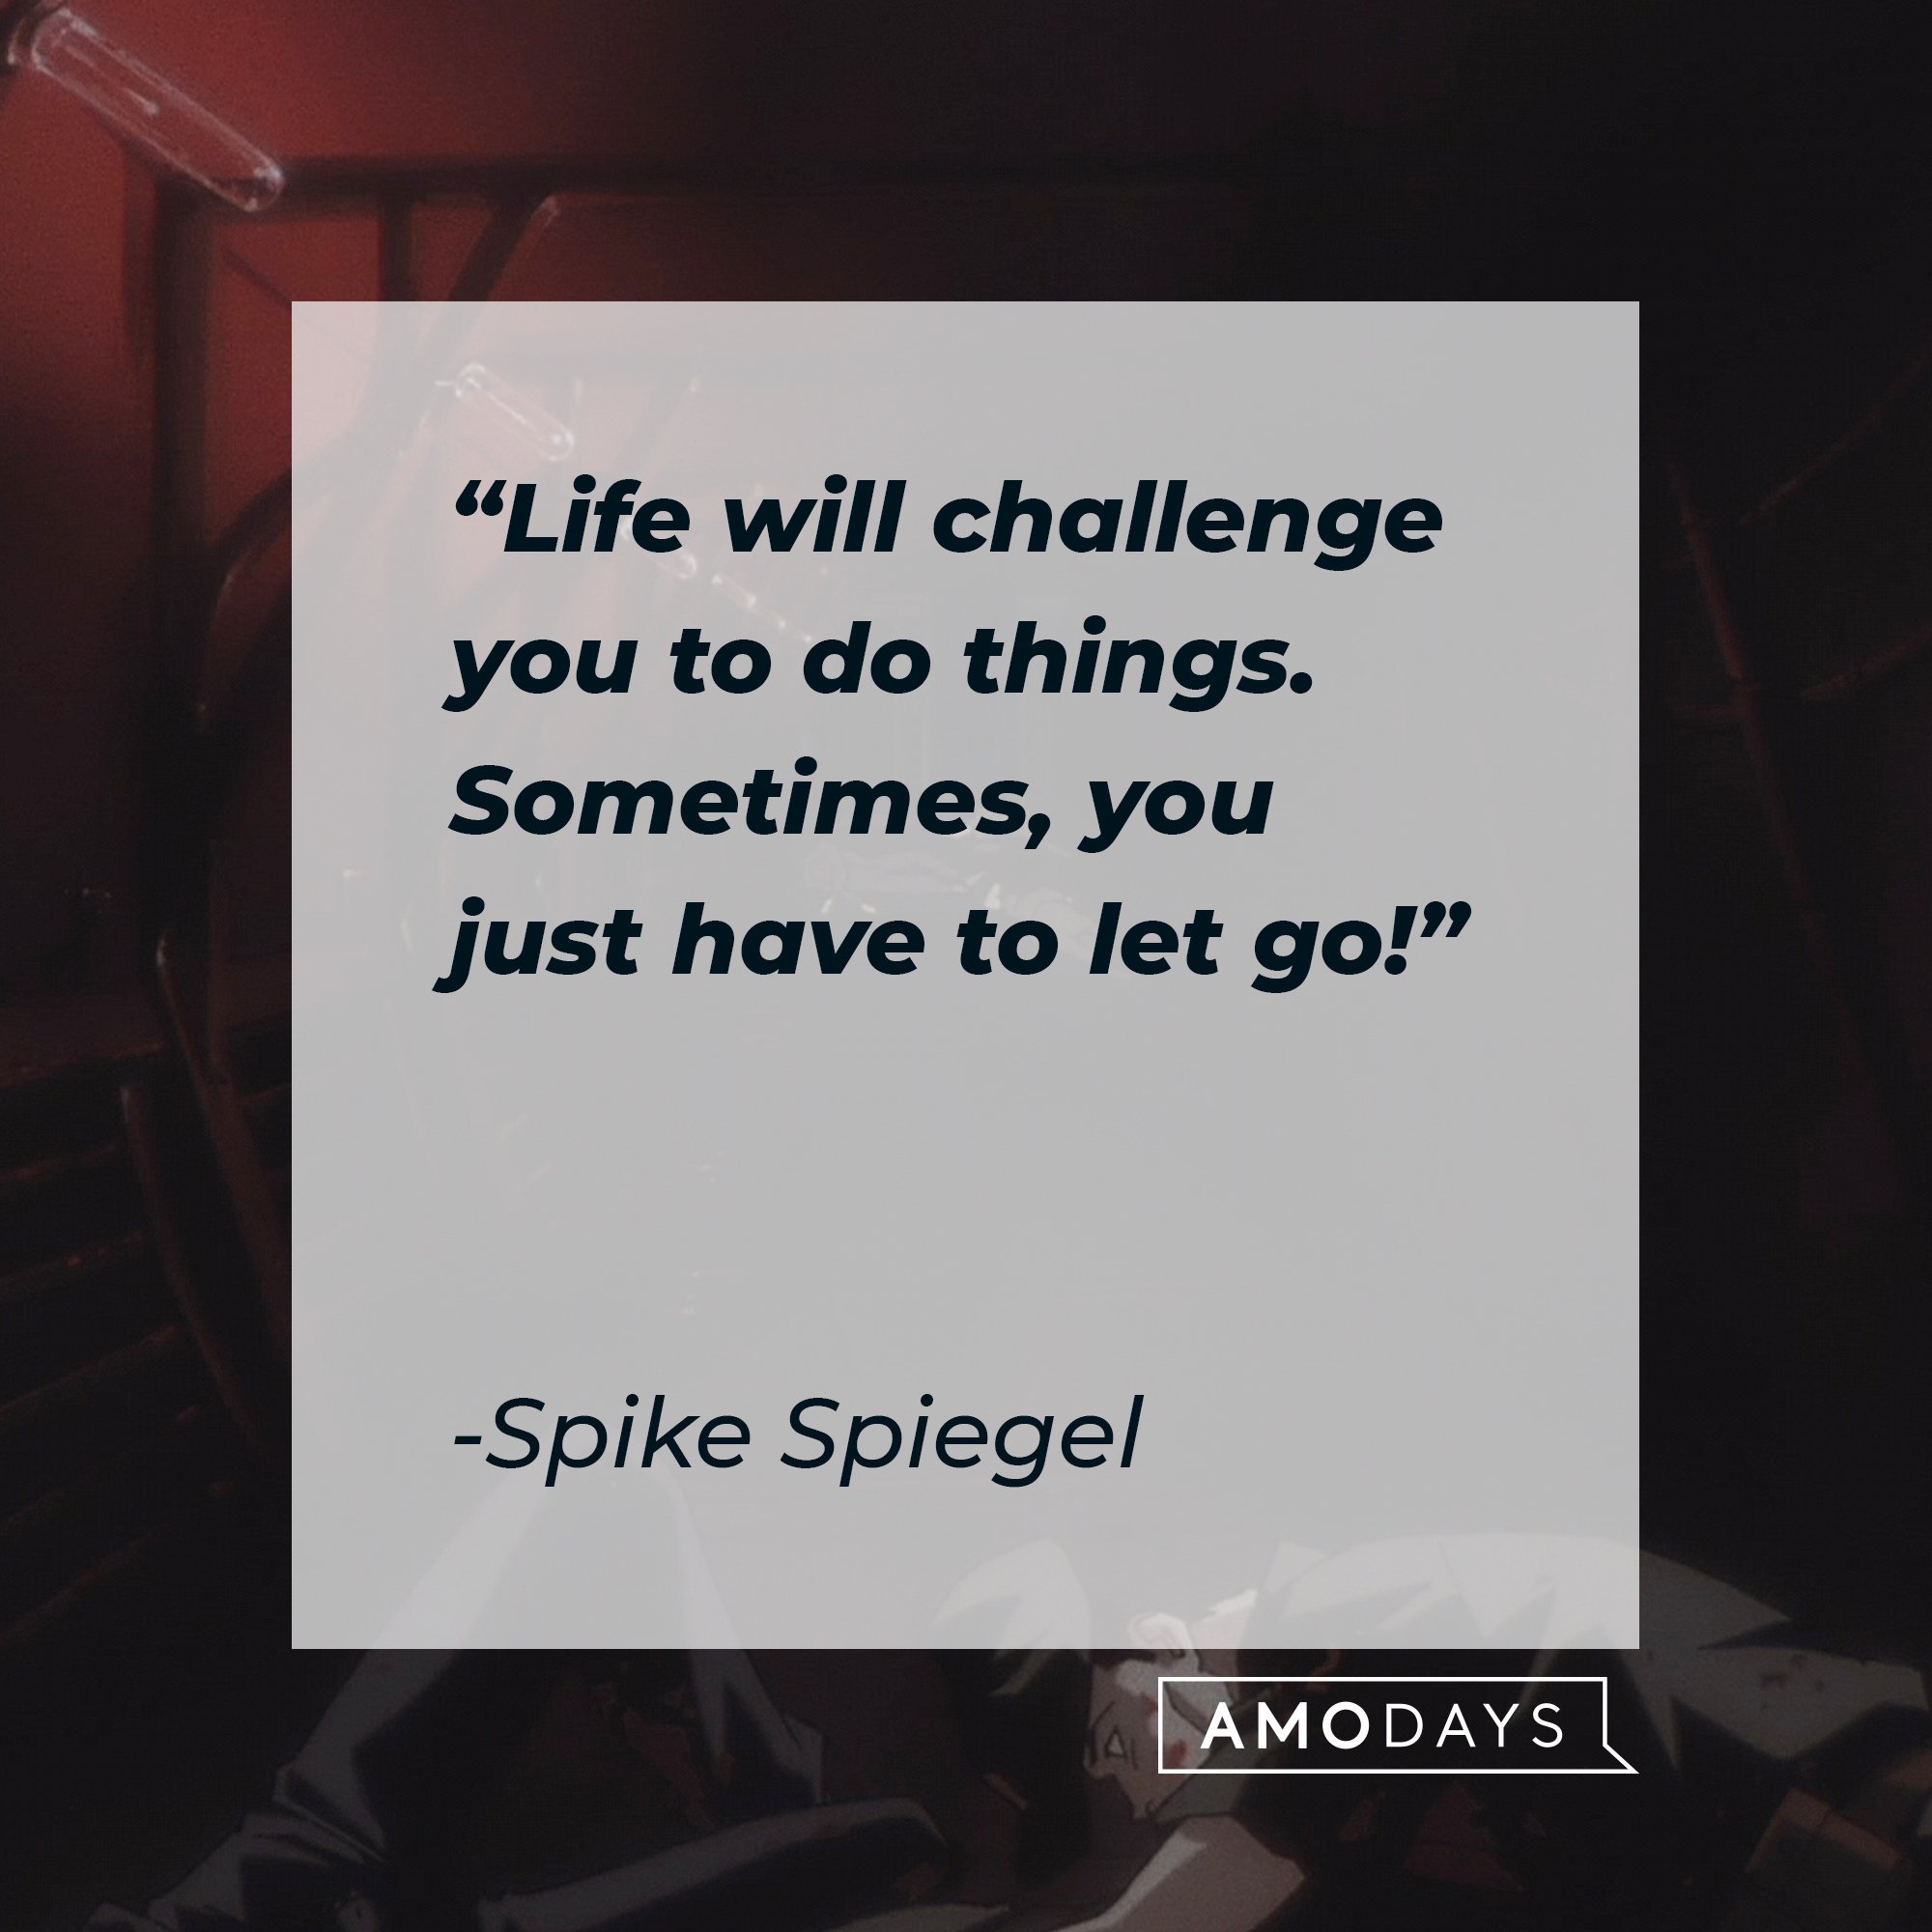 Spike Spiegel's quote: "Life will challenge you to do things sometimes. You just have to let go!" | Image: AmoDays 